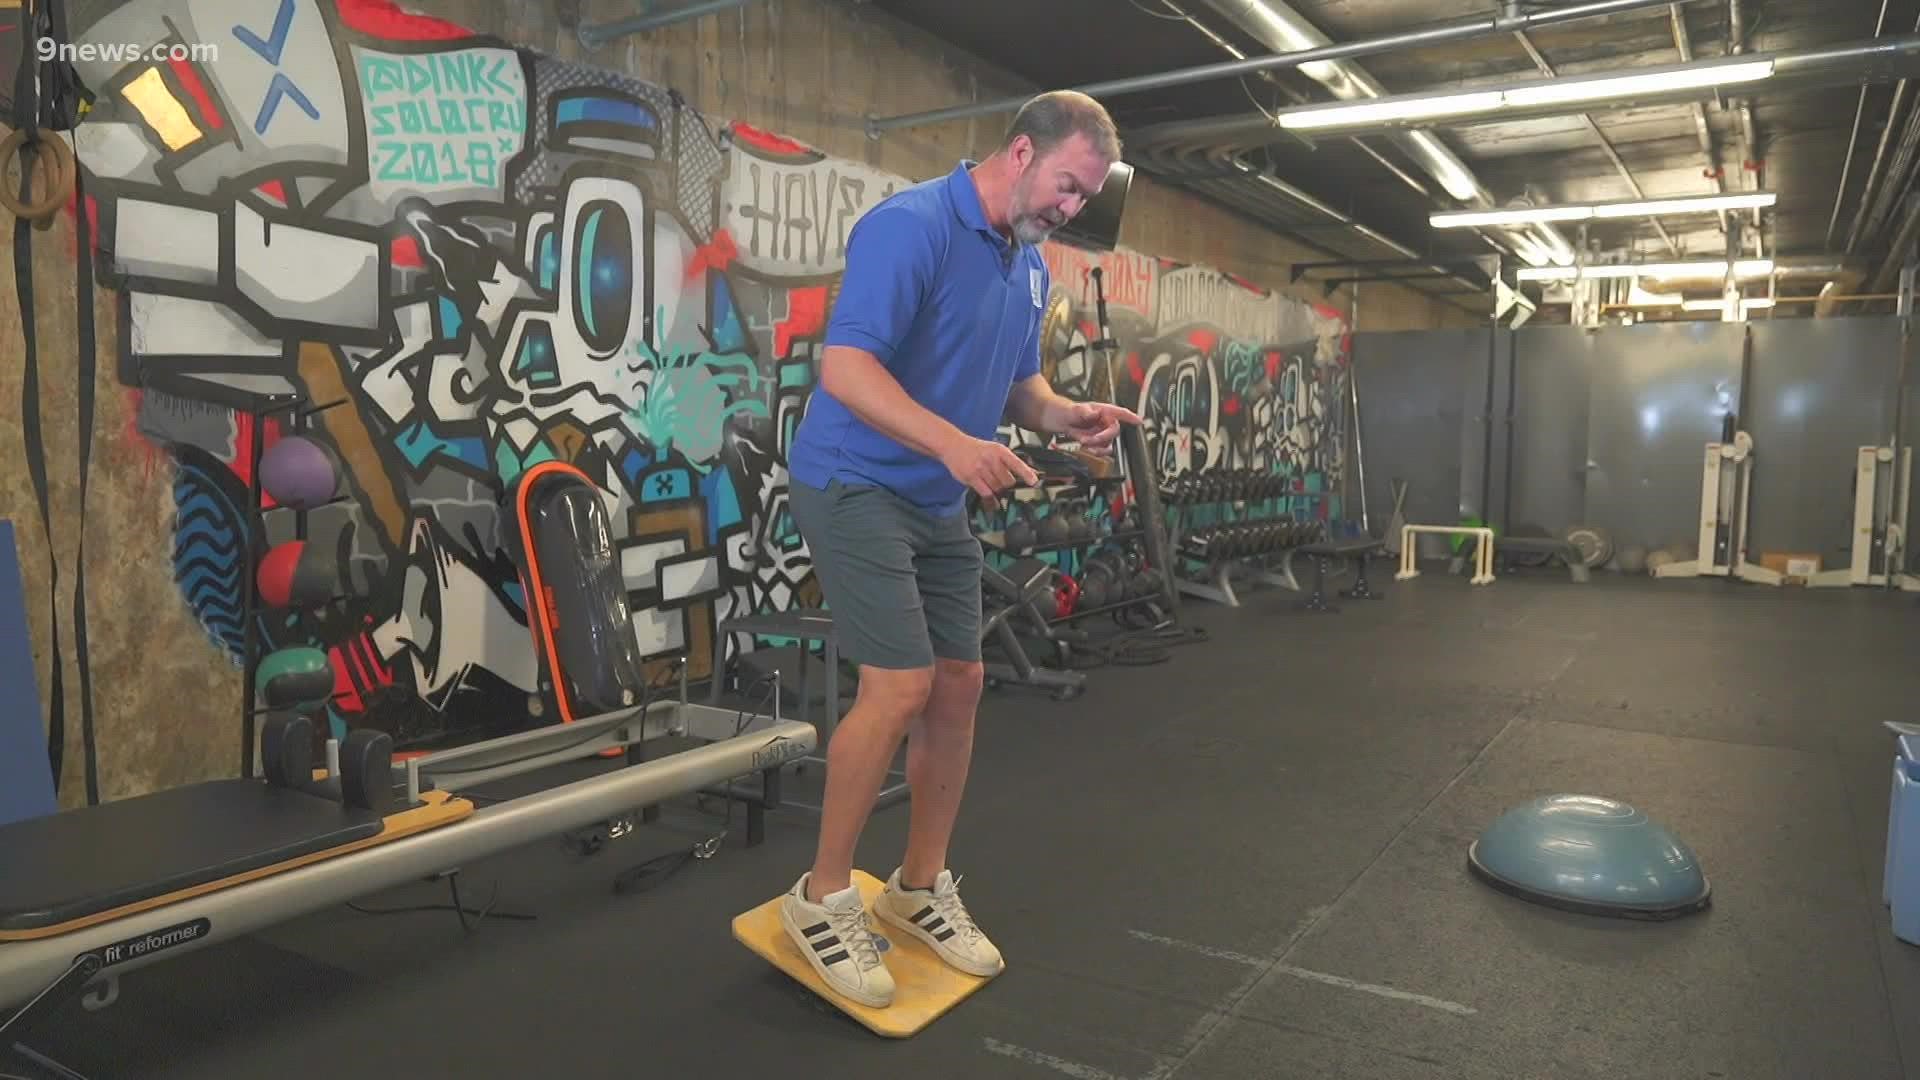 Are you a bit rusty? 9NEWS fitness expert Jamie Atlas has some tips to get you ready for ski season while staying injury free.